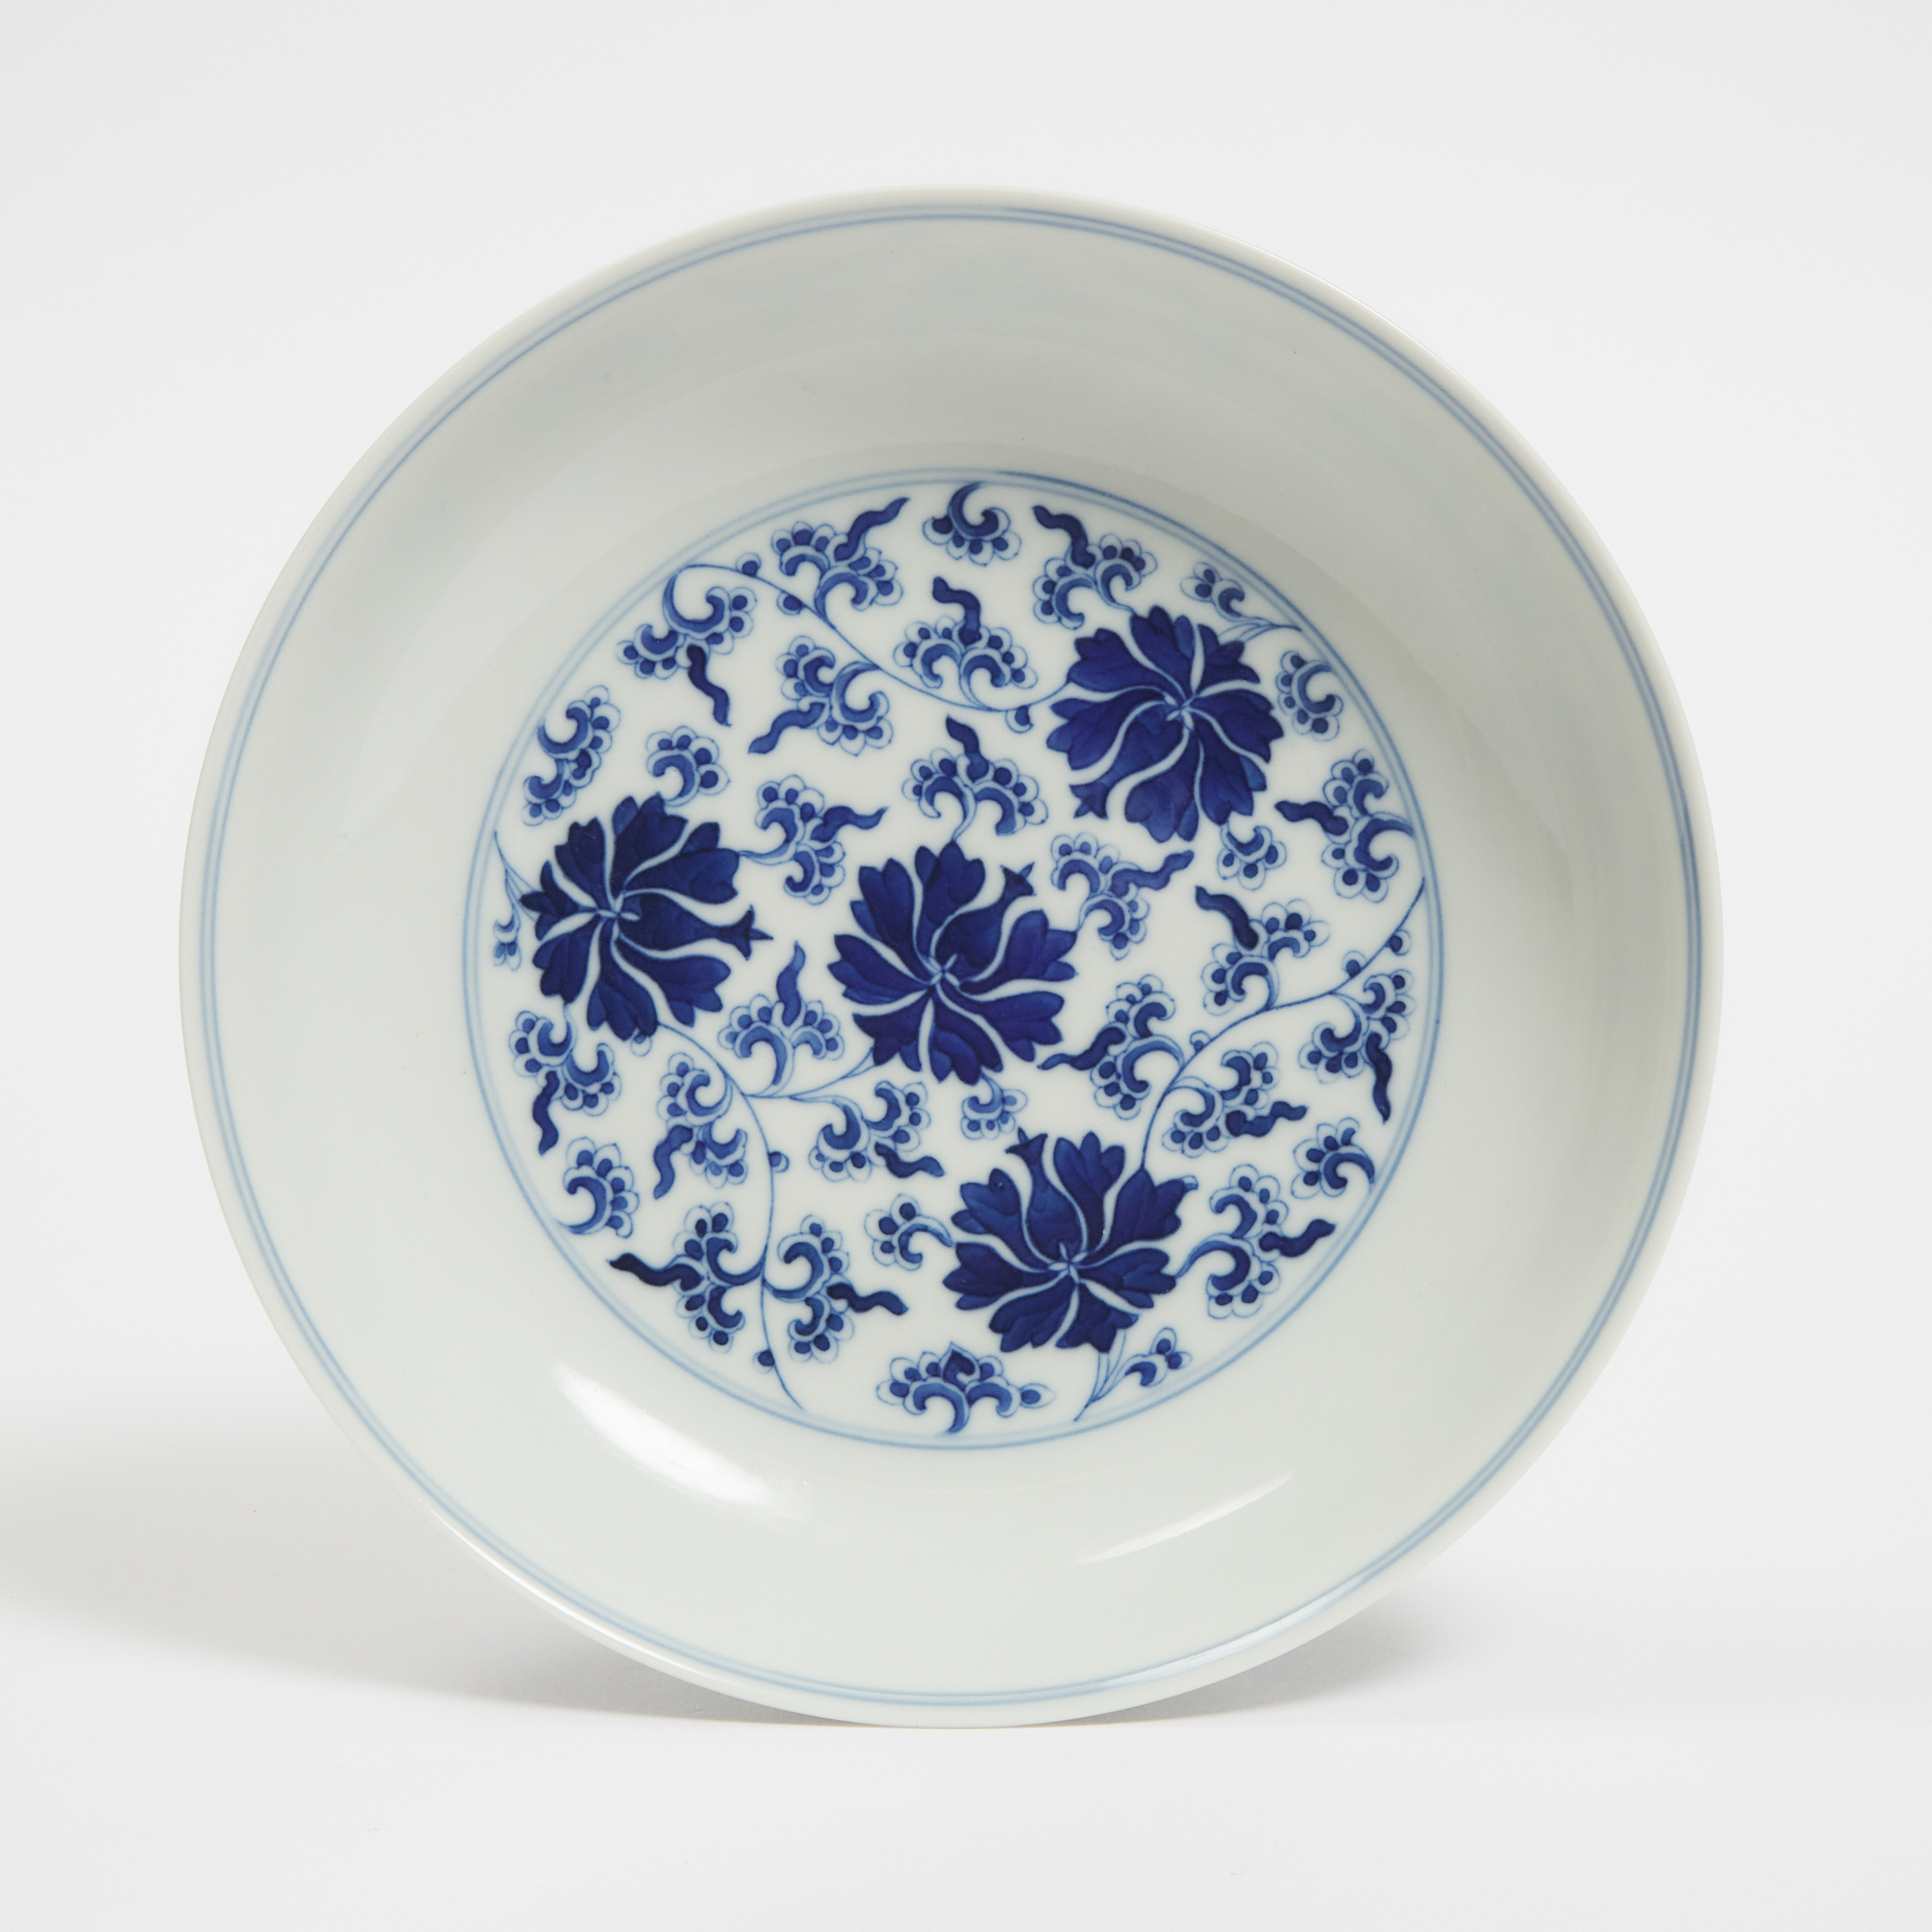 A Blue and White 'Lotus' Dish, Qianlong Mark and Period (1736-1795)